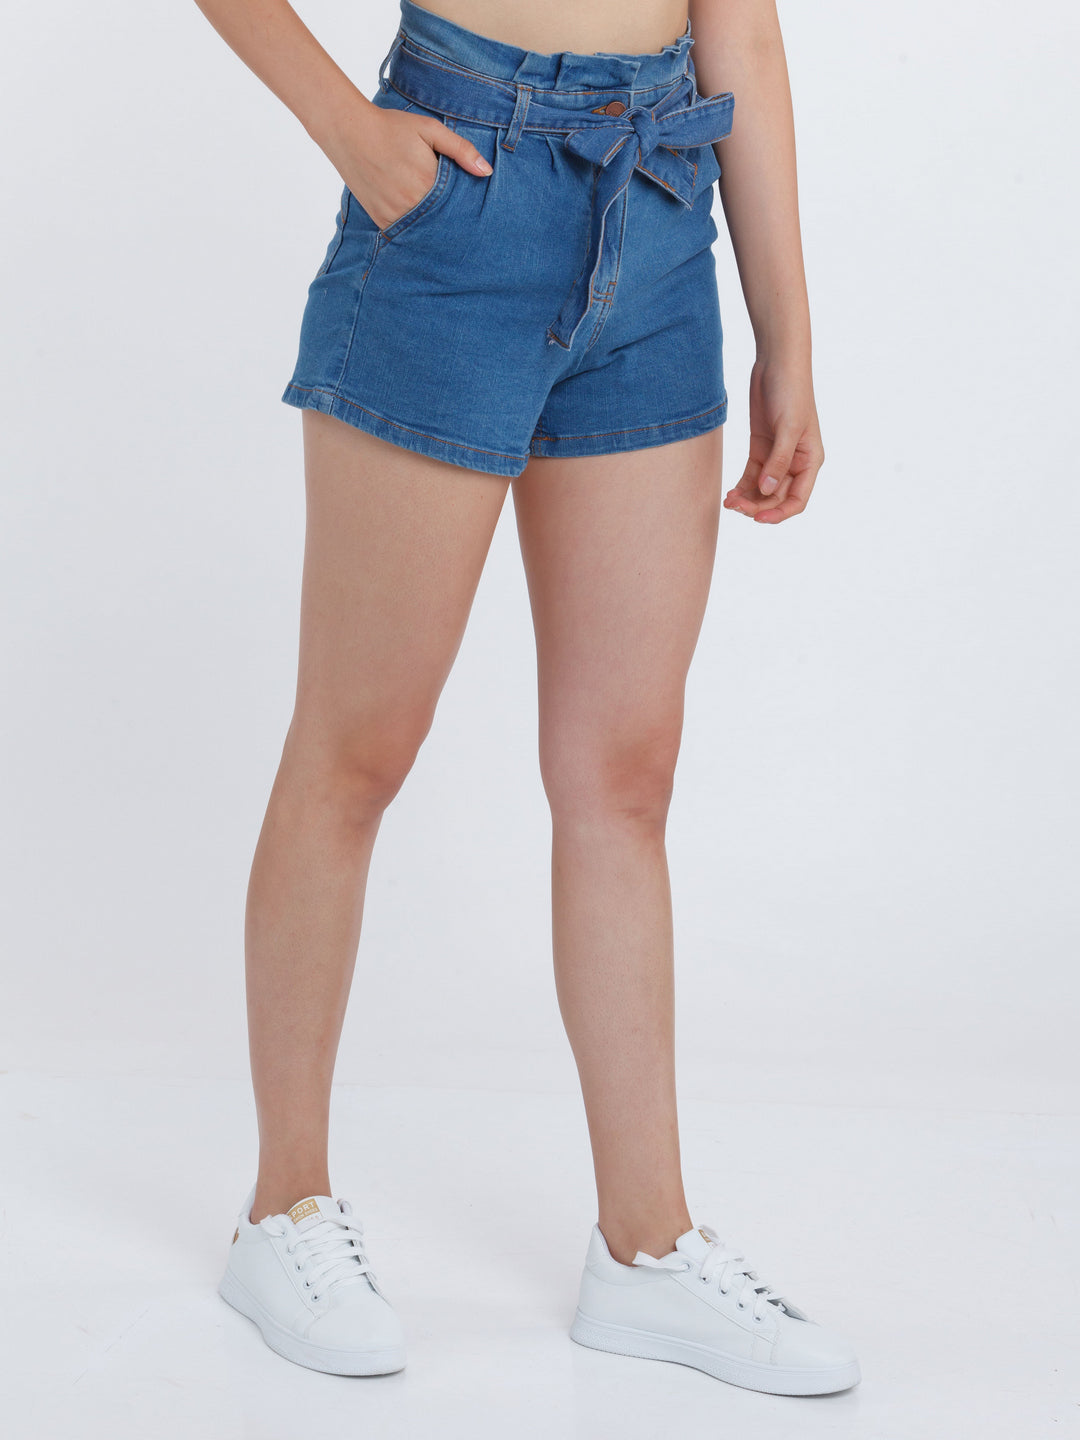 What To Wear With Jean Shorts + 10 Outfit Ideas To Try